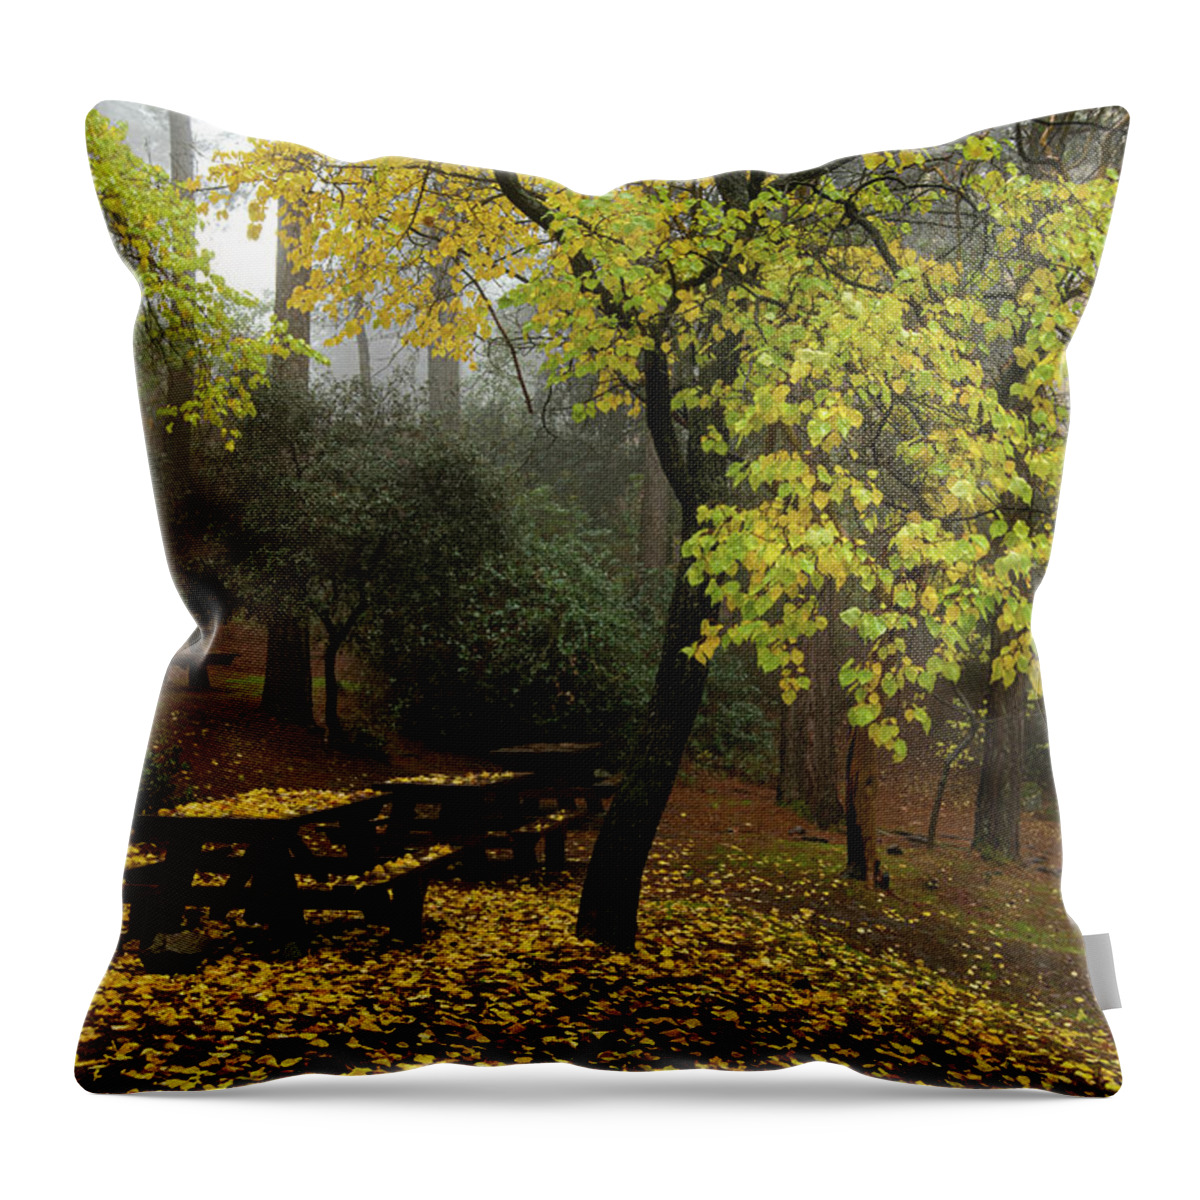 Autumn Throw Pillow featuring the photograph Autumn landscape with trees and yellow leaves on the ground after rain by Michalakis Ppalis